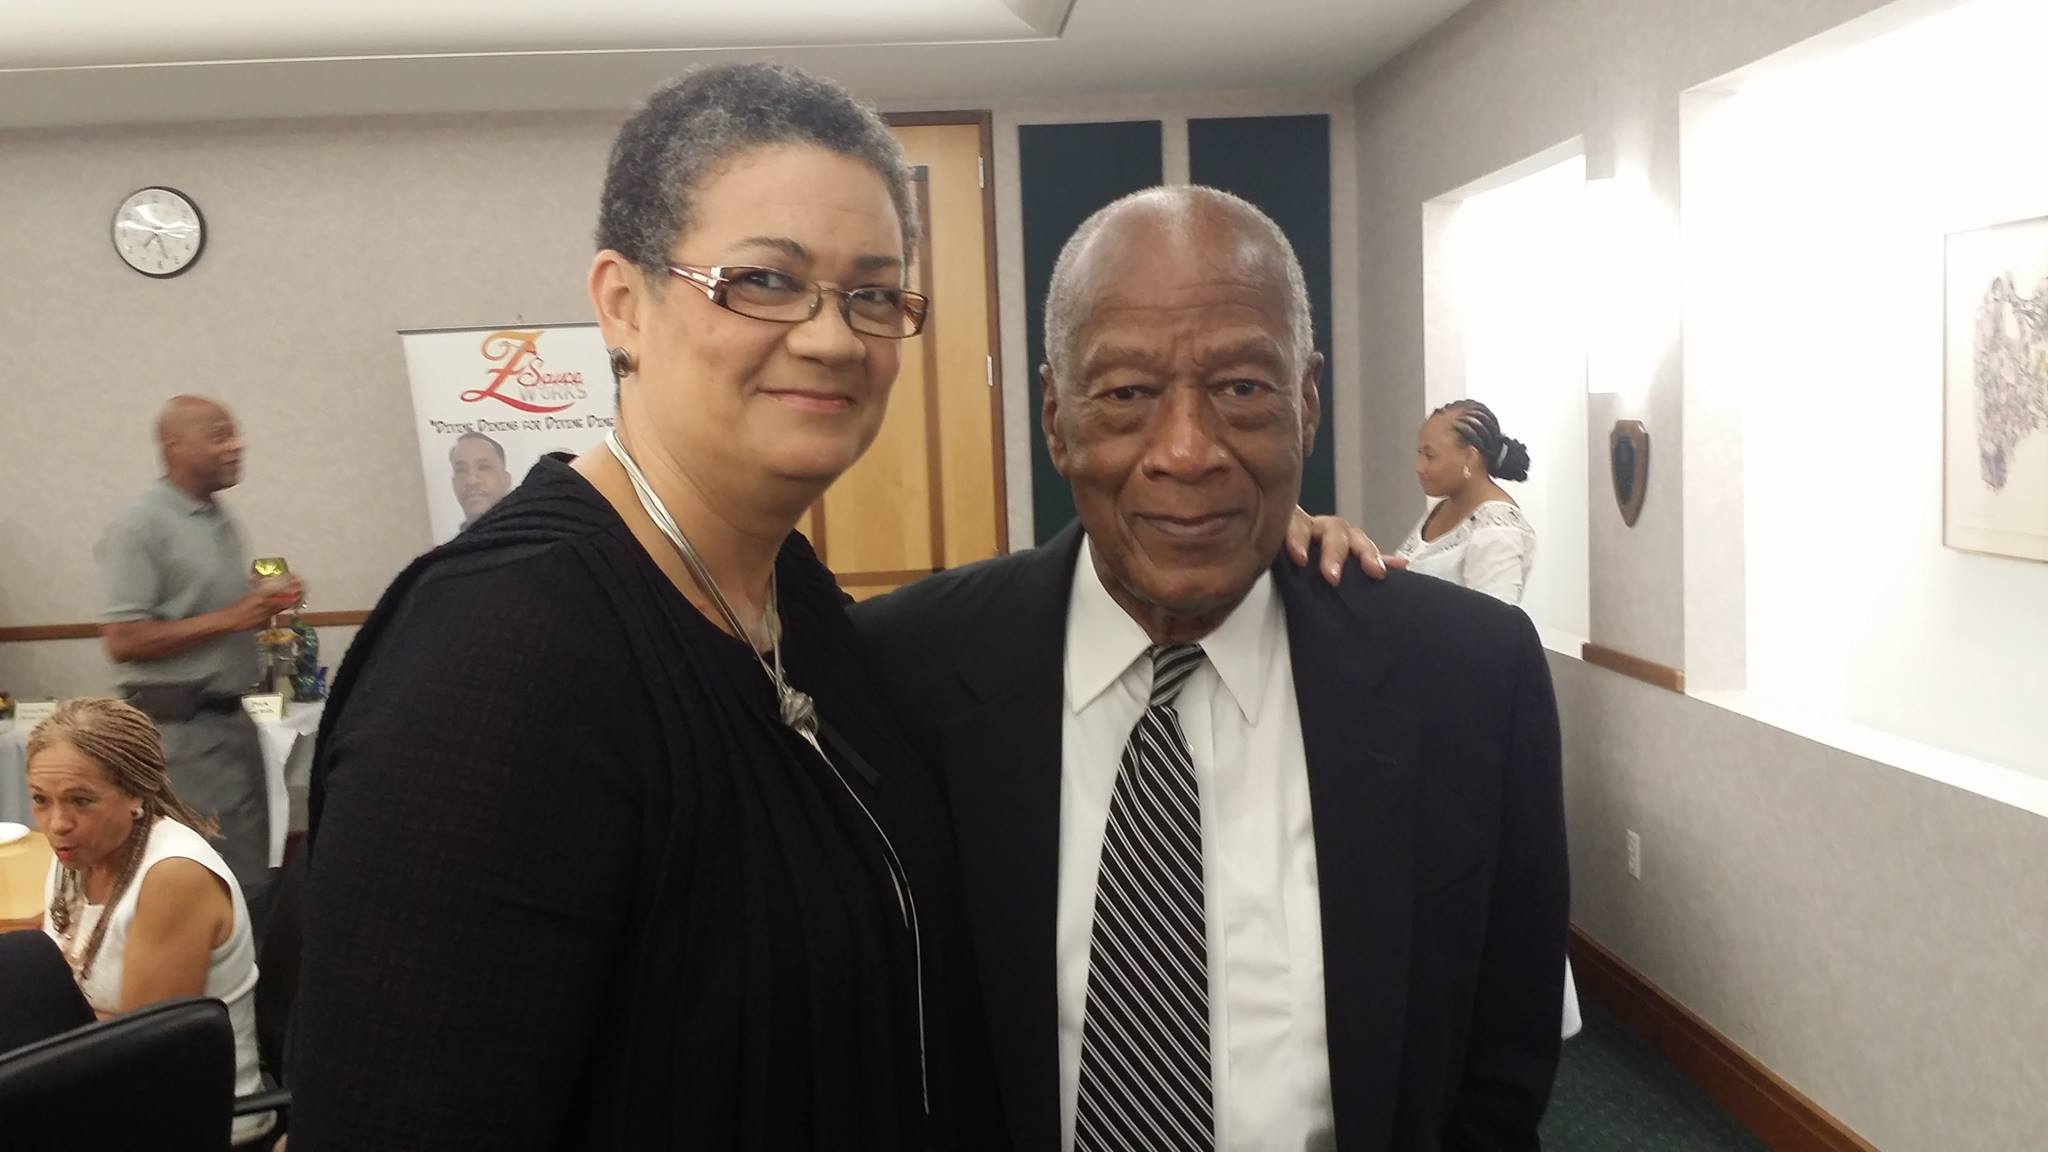 With Dr. King associate & leading educator, Richard Green